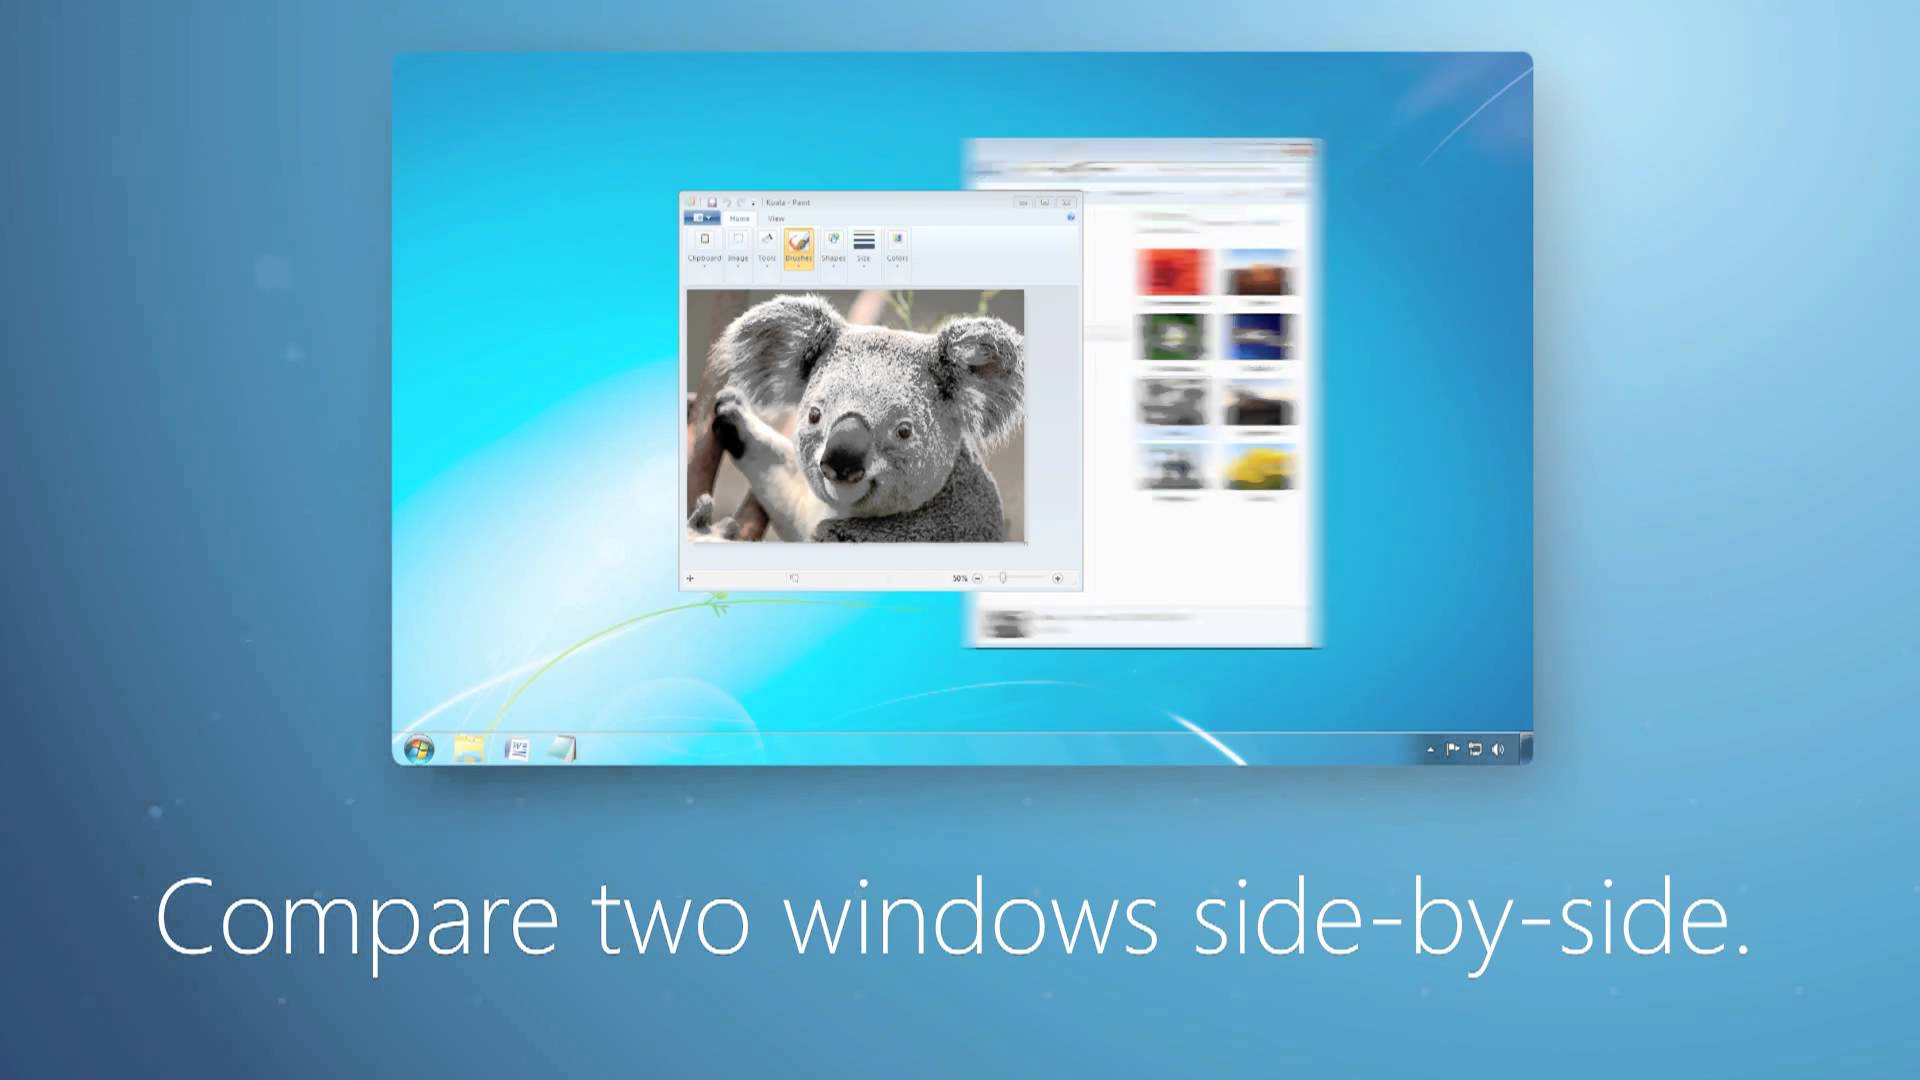 Windows 7 your PC Simplified. Your PC Simplified. Windows side